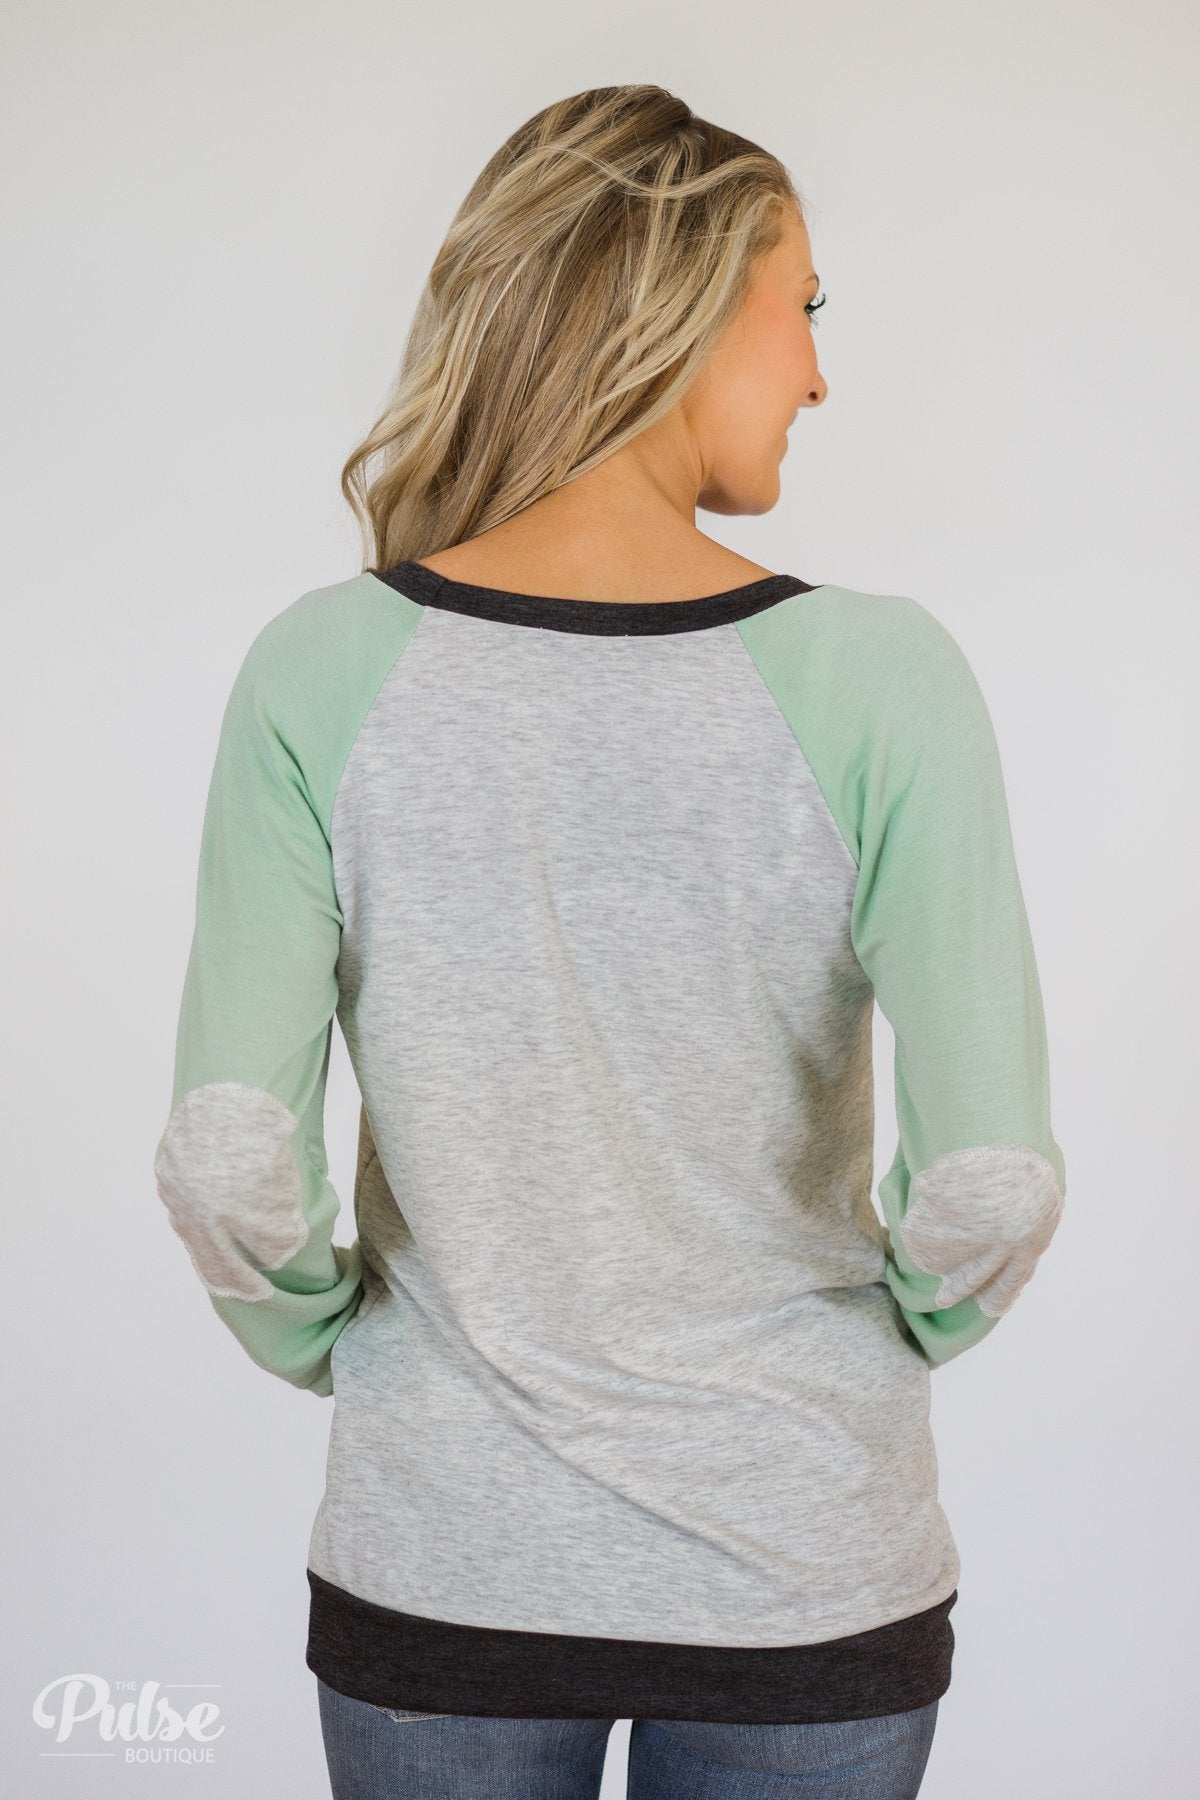 Elbow Patch Color Block Pullover Top- Mint, Charcoal, Grey